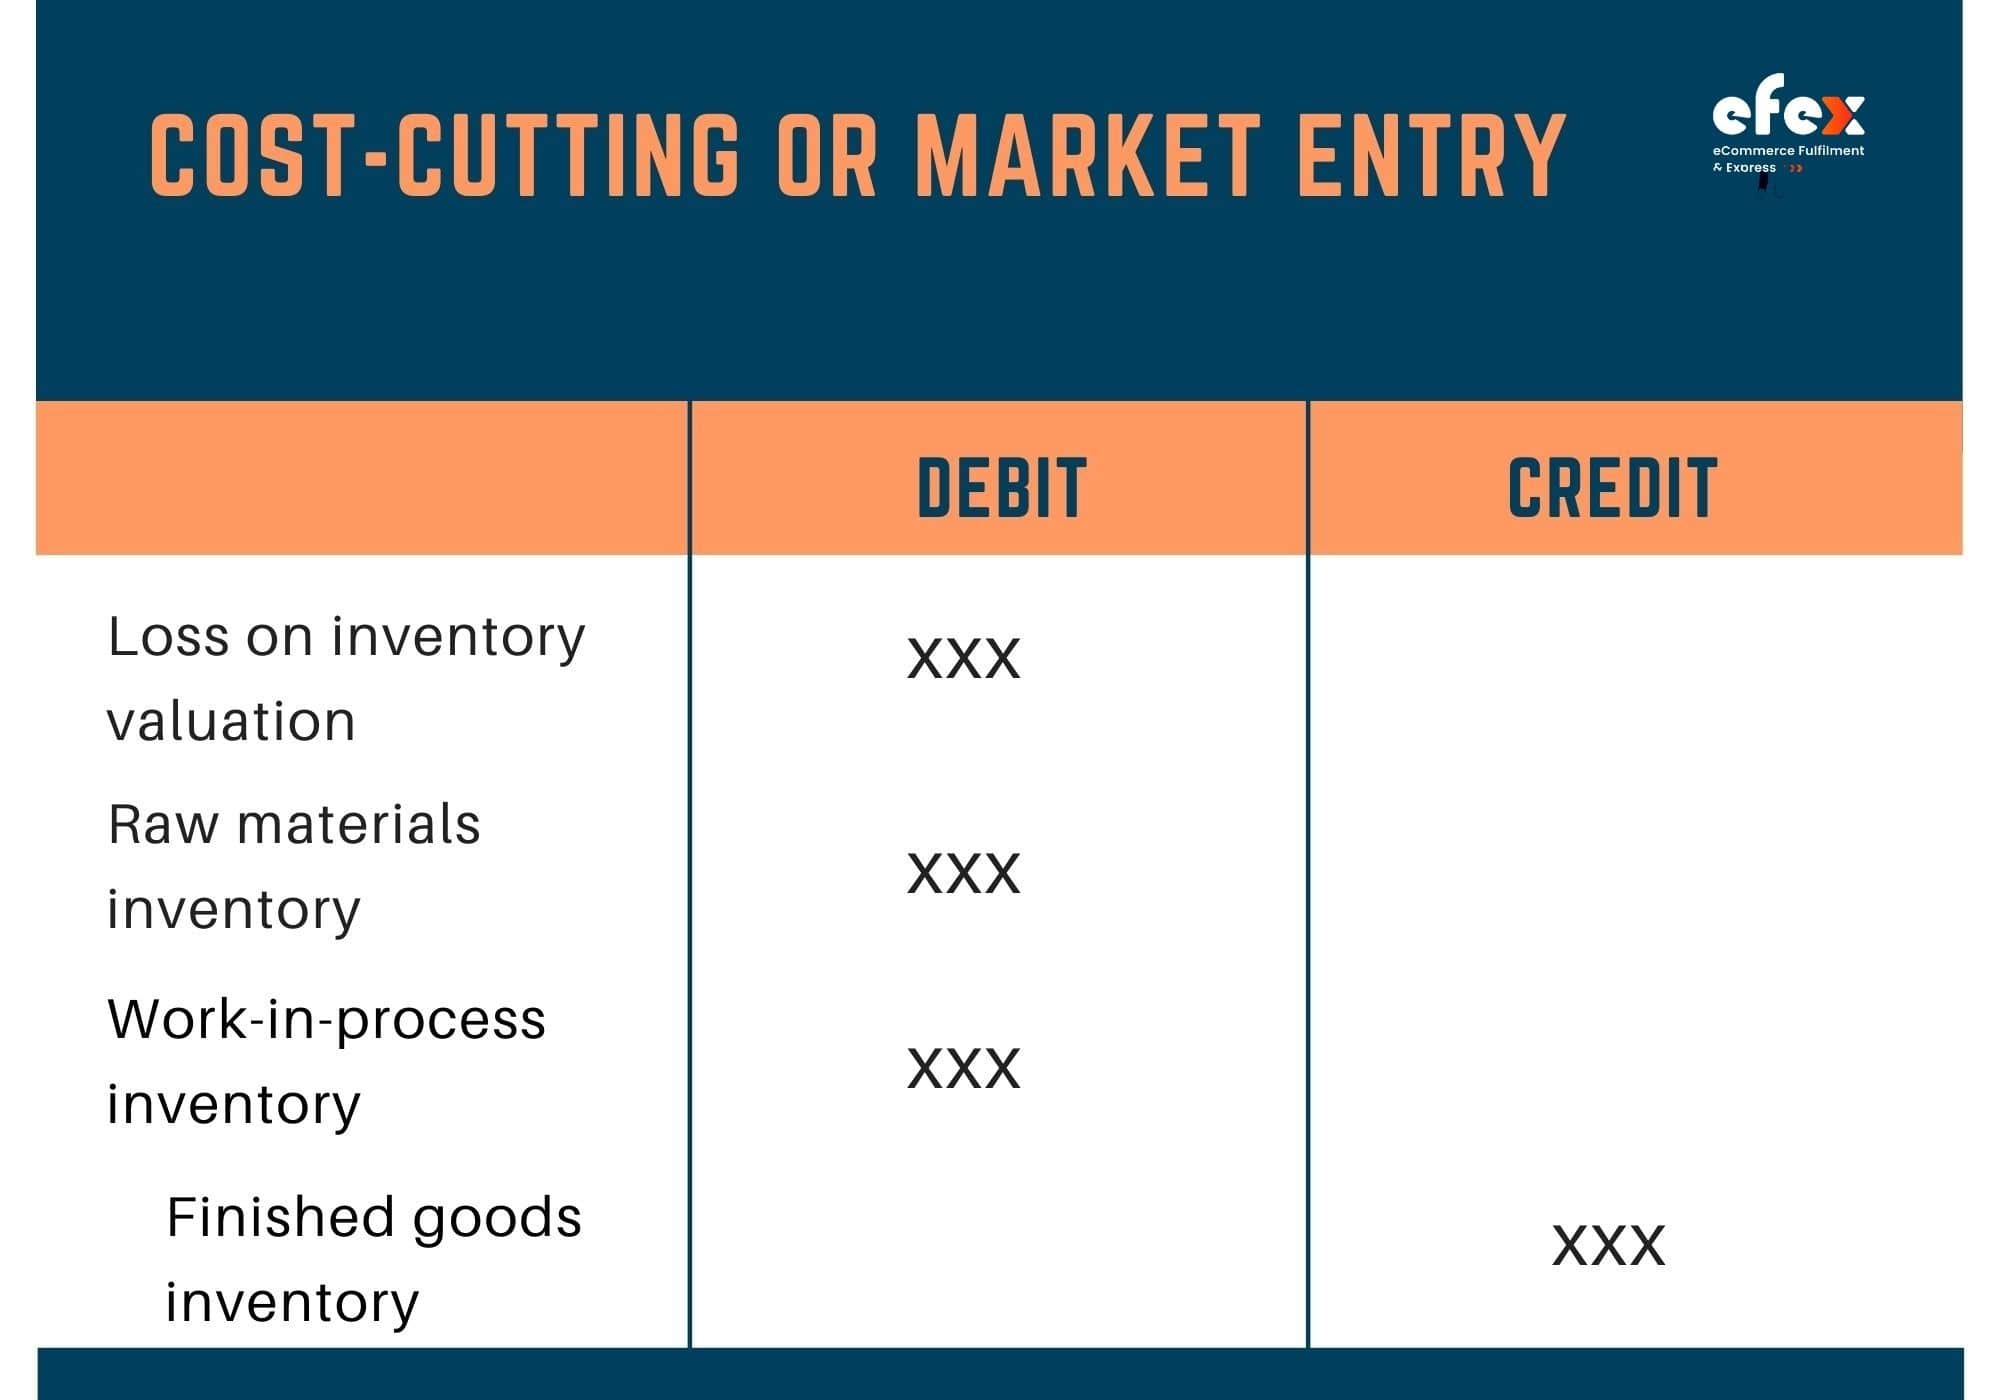 Cost-cutting or market entry